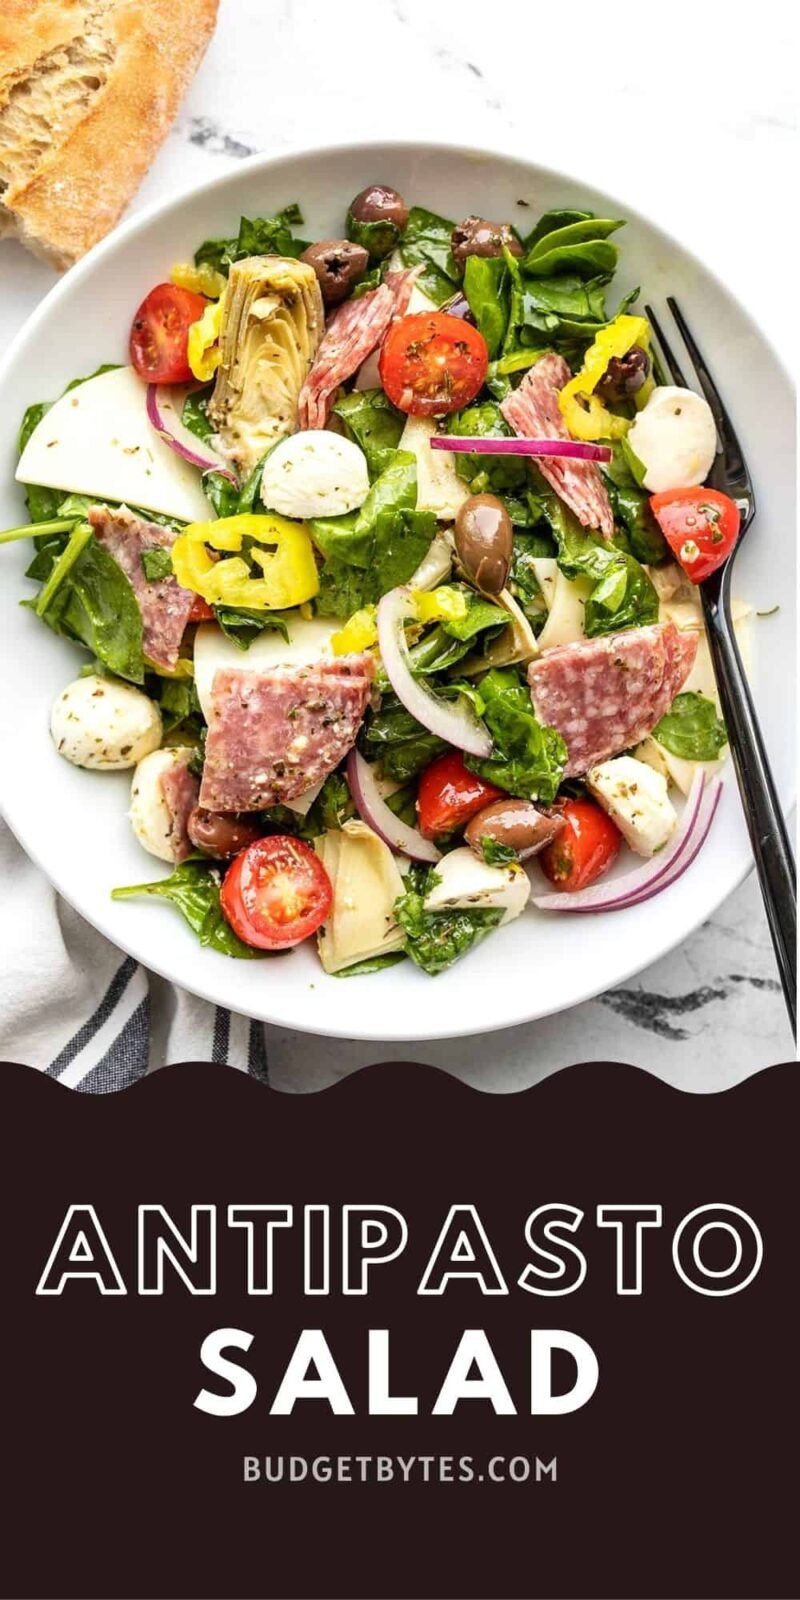 Antipasto salad in a bowl, title text at the bottom